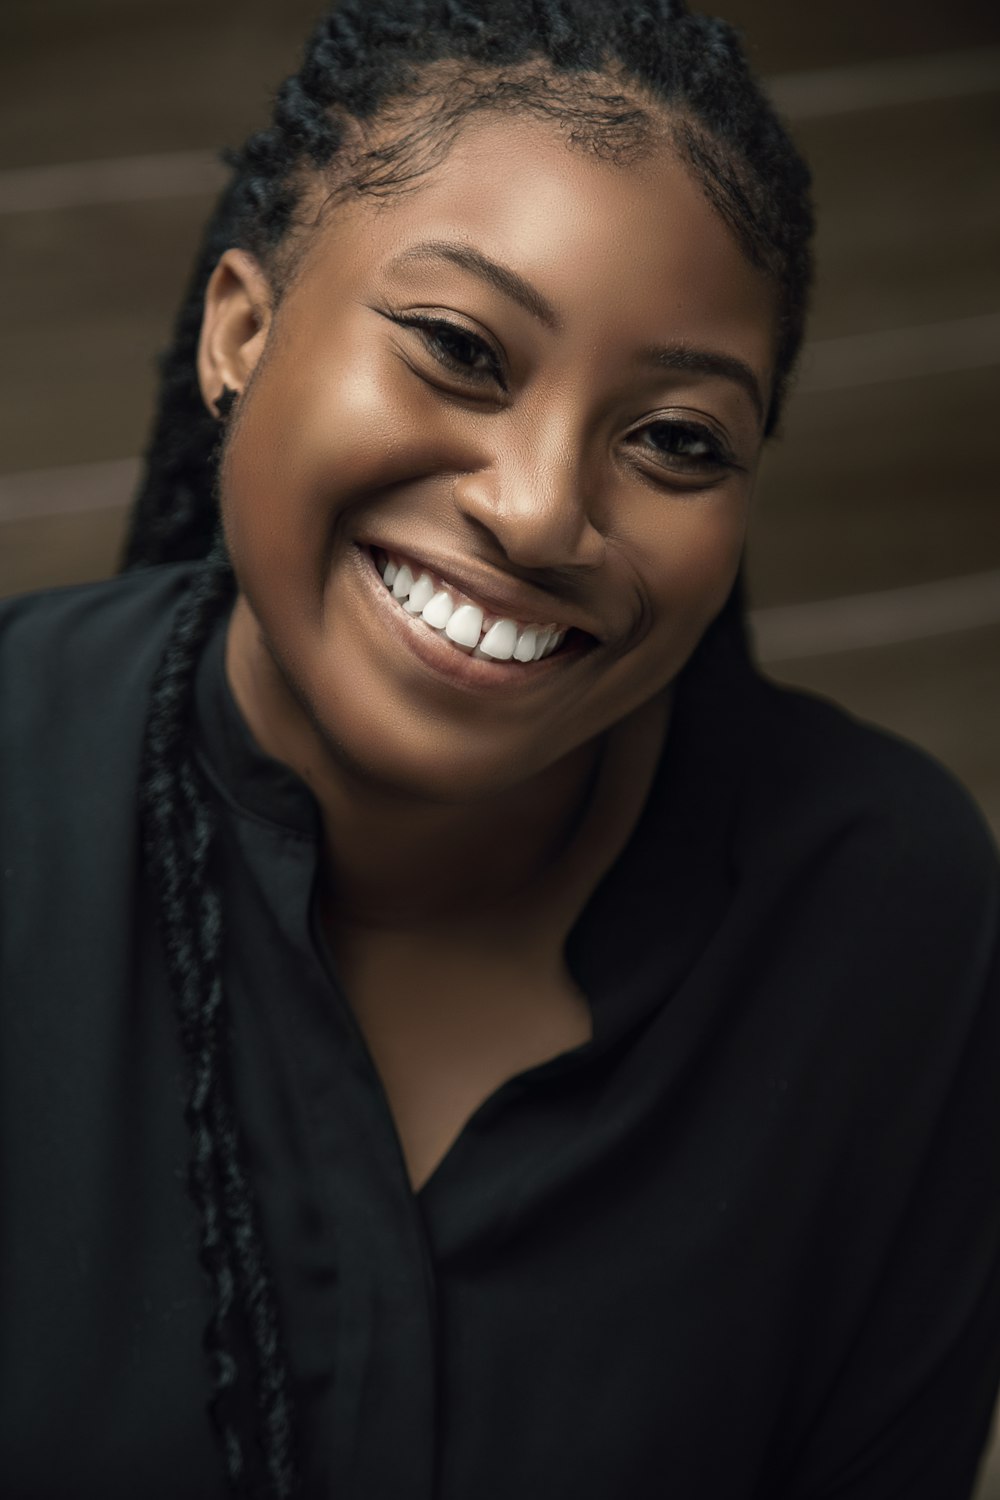 a smiling woman with braids and a black shirt